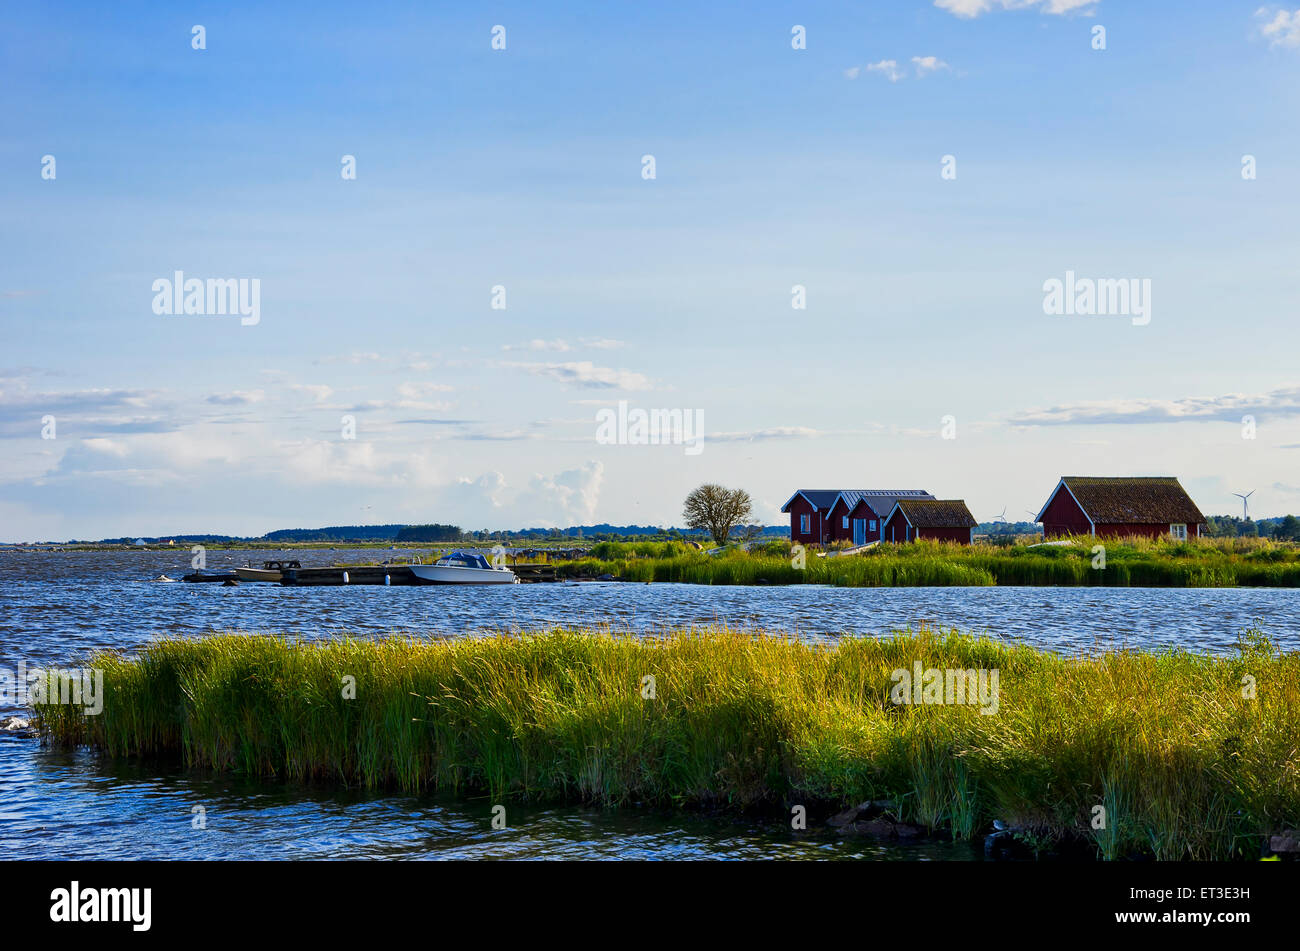 Seaside idyll in the evening light with huts and boats on the island of Oland, Sweden. Stock Photo